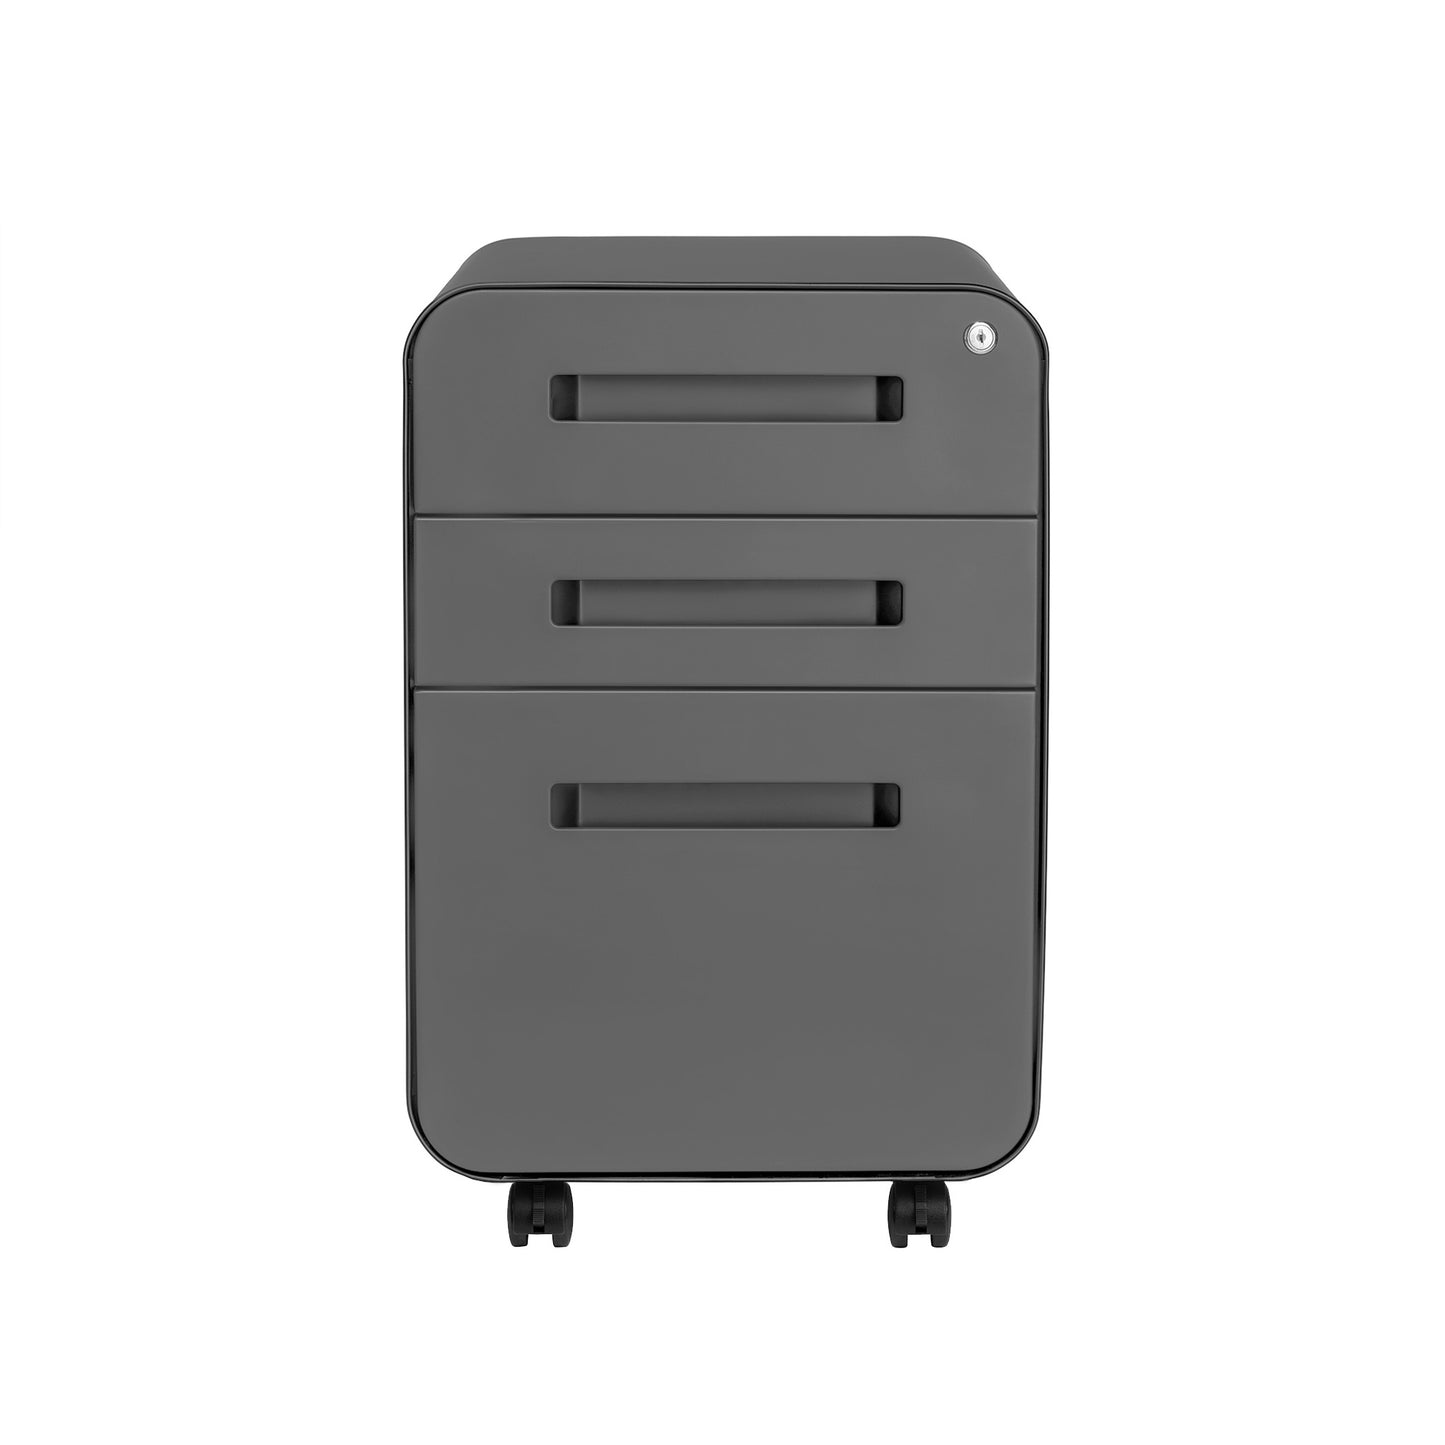 SHIPS MARCH 15TH - Stockpile Curve File Cabinet (Dark Grey)